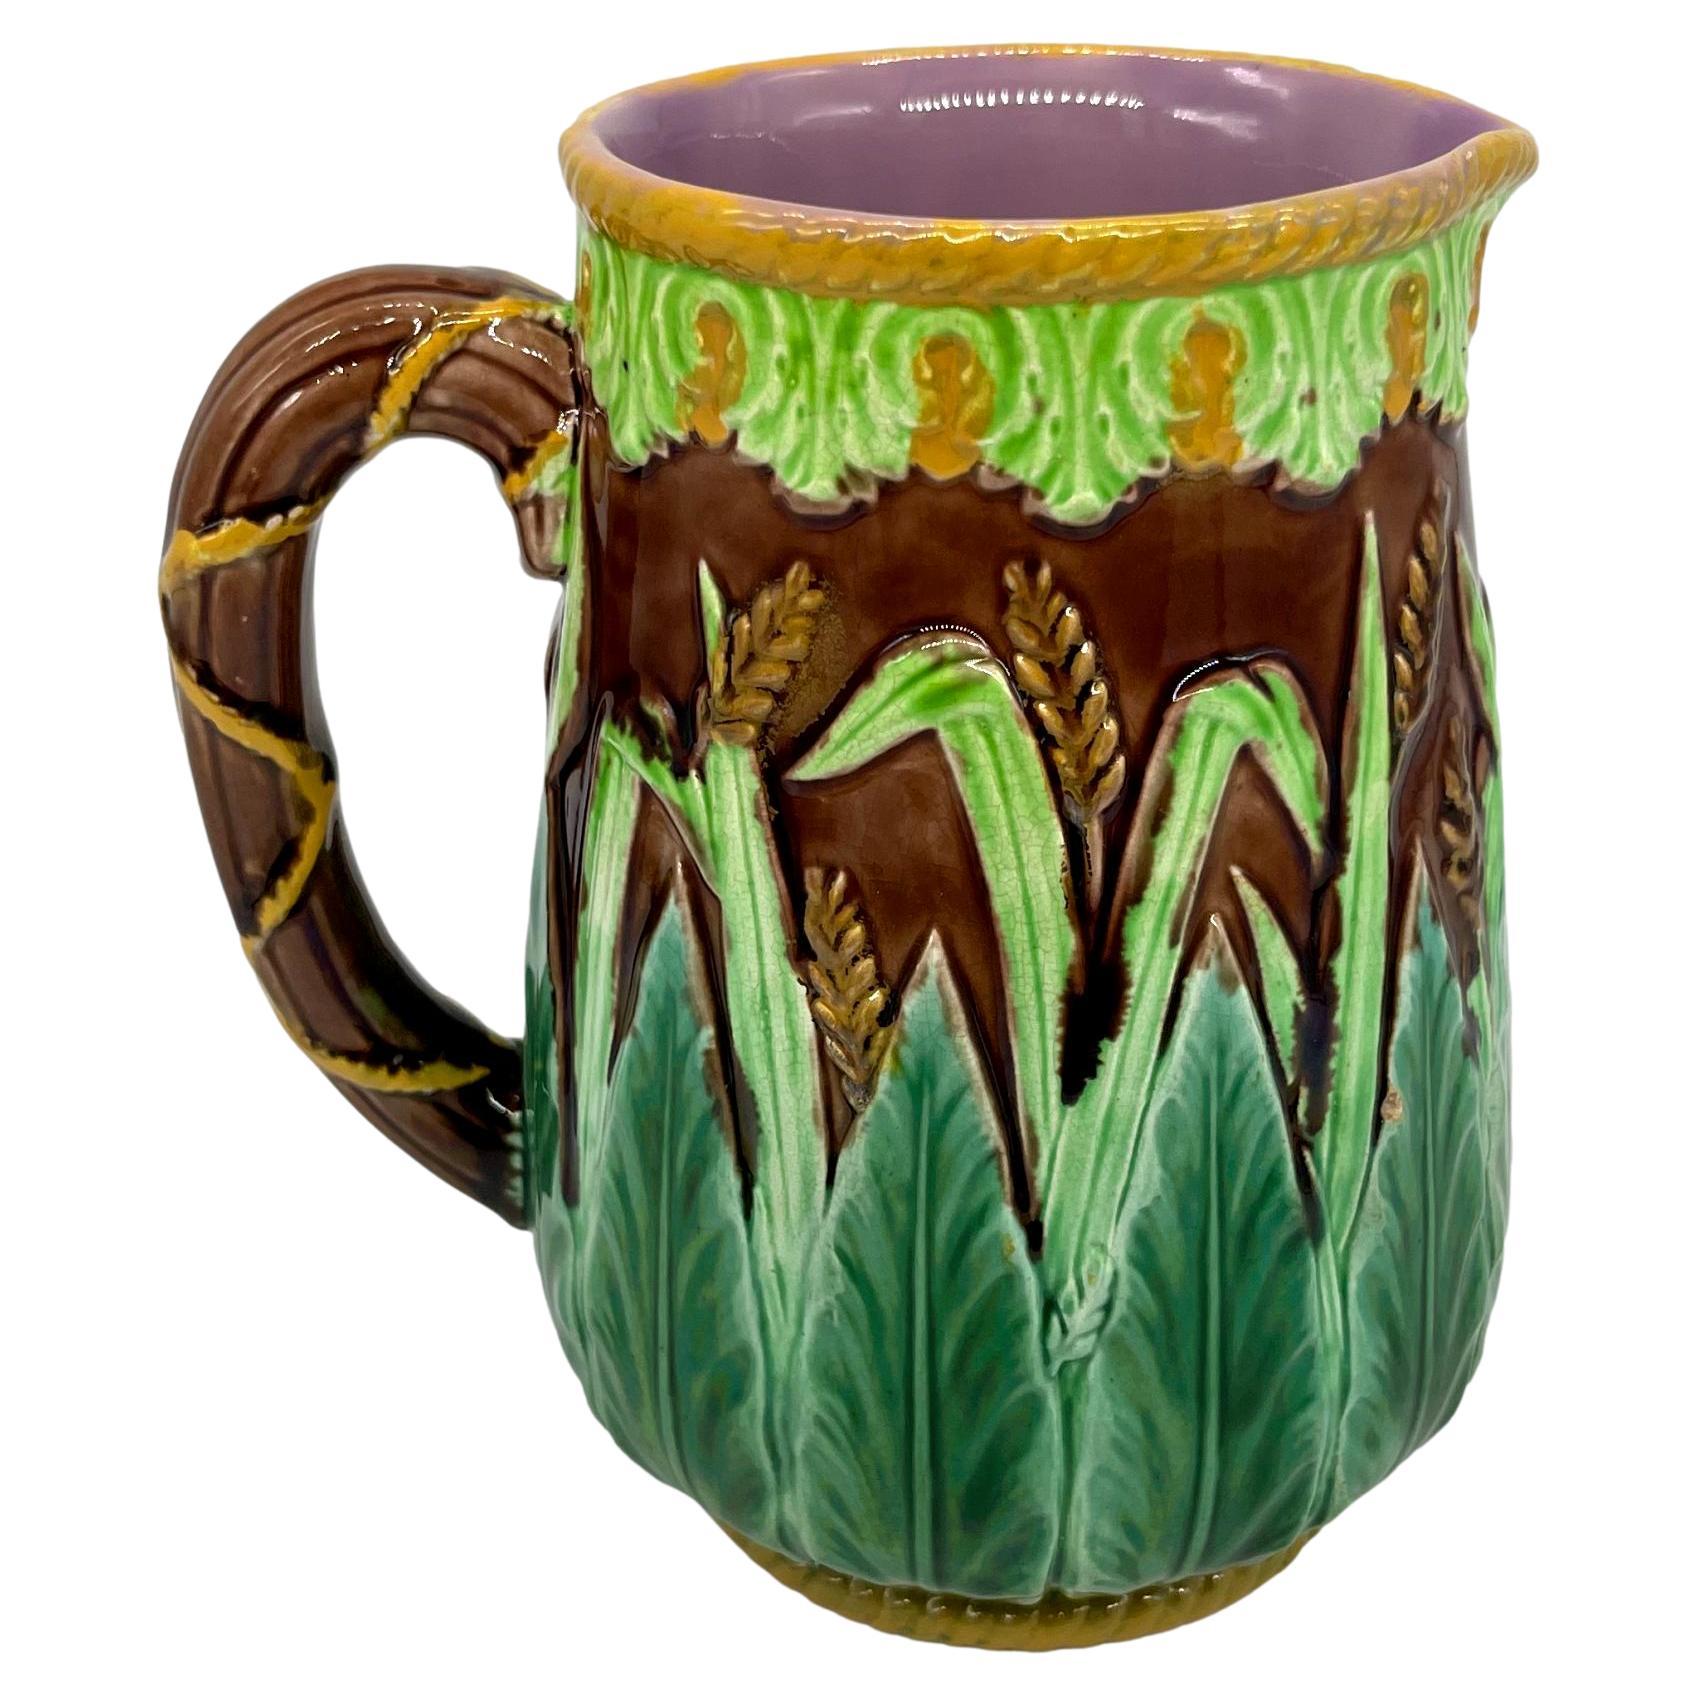 George Jones Majolica Wheat Pitcher with Green Acanthus Leaves, Ca. 1875 For Sale